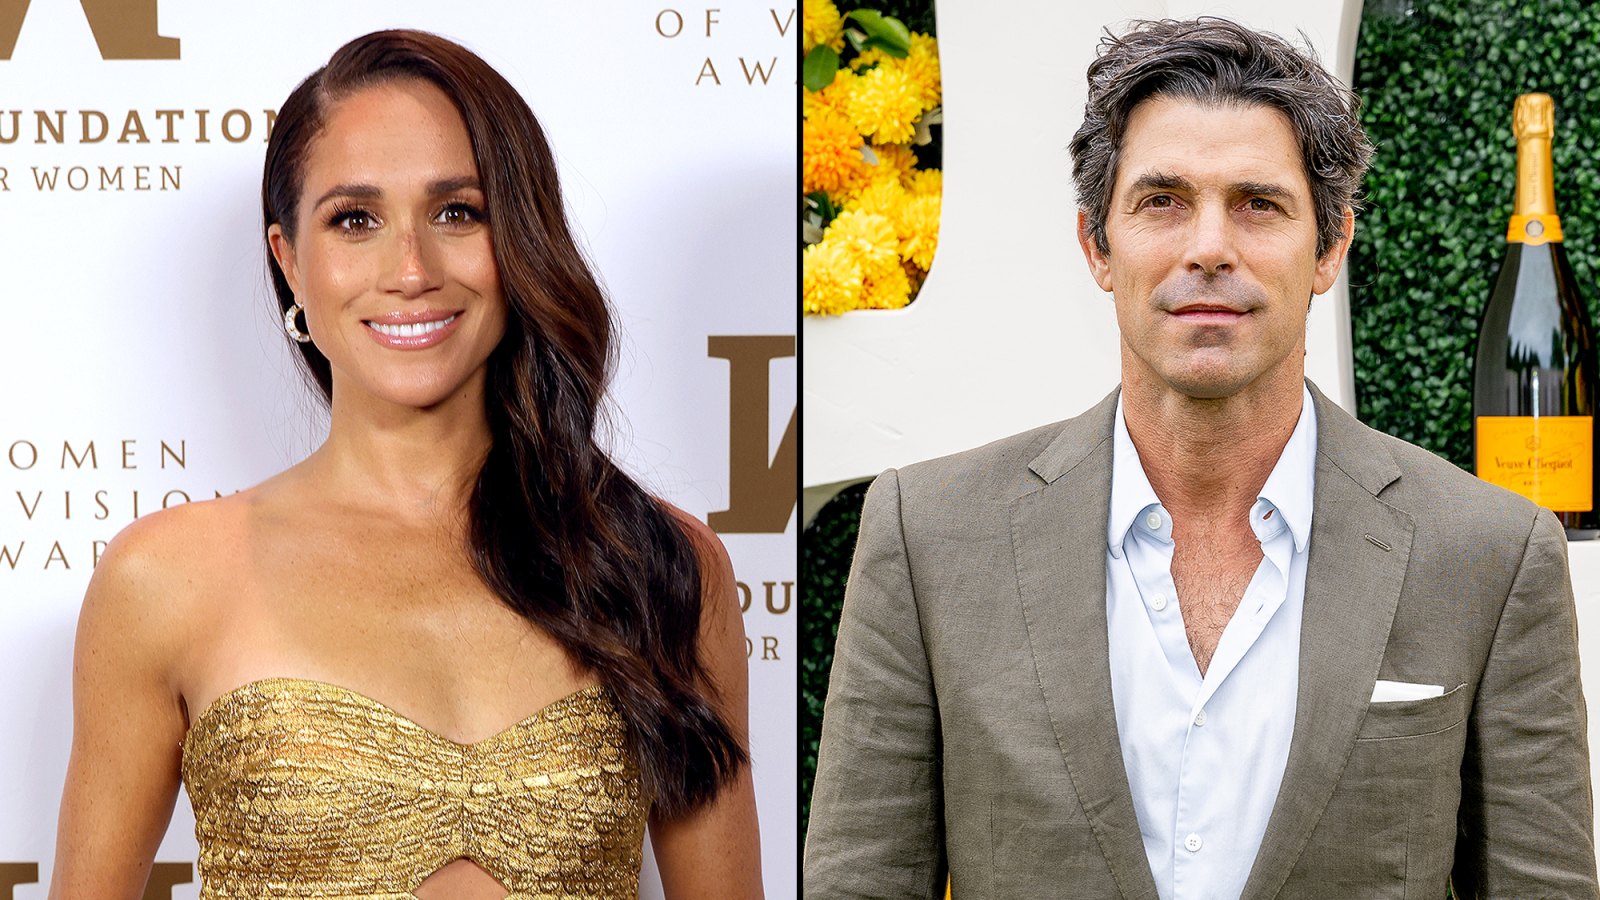 Meghan Markle Sends Prince Harry's Friend Nacho Figueras New Products From American Riviera Orchard